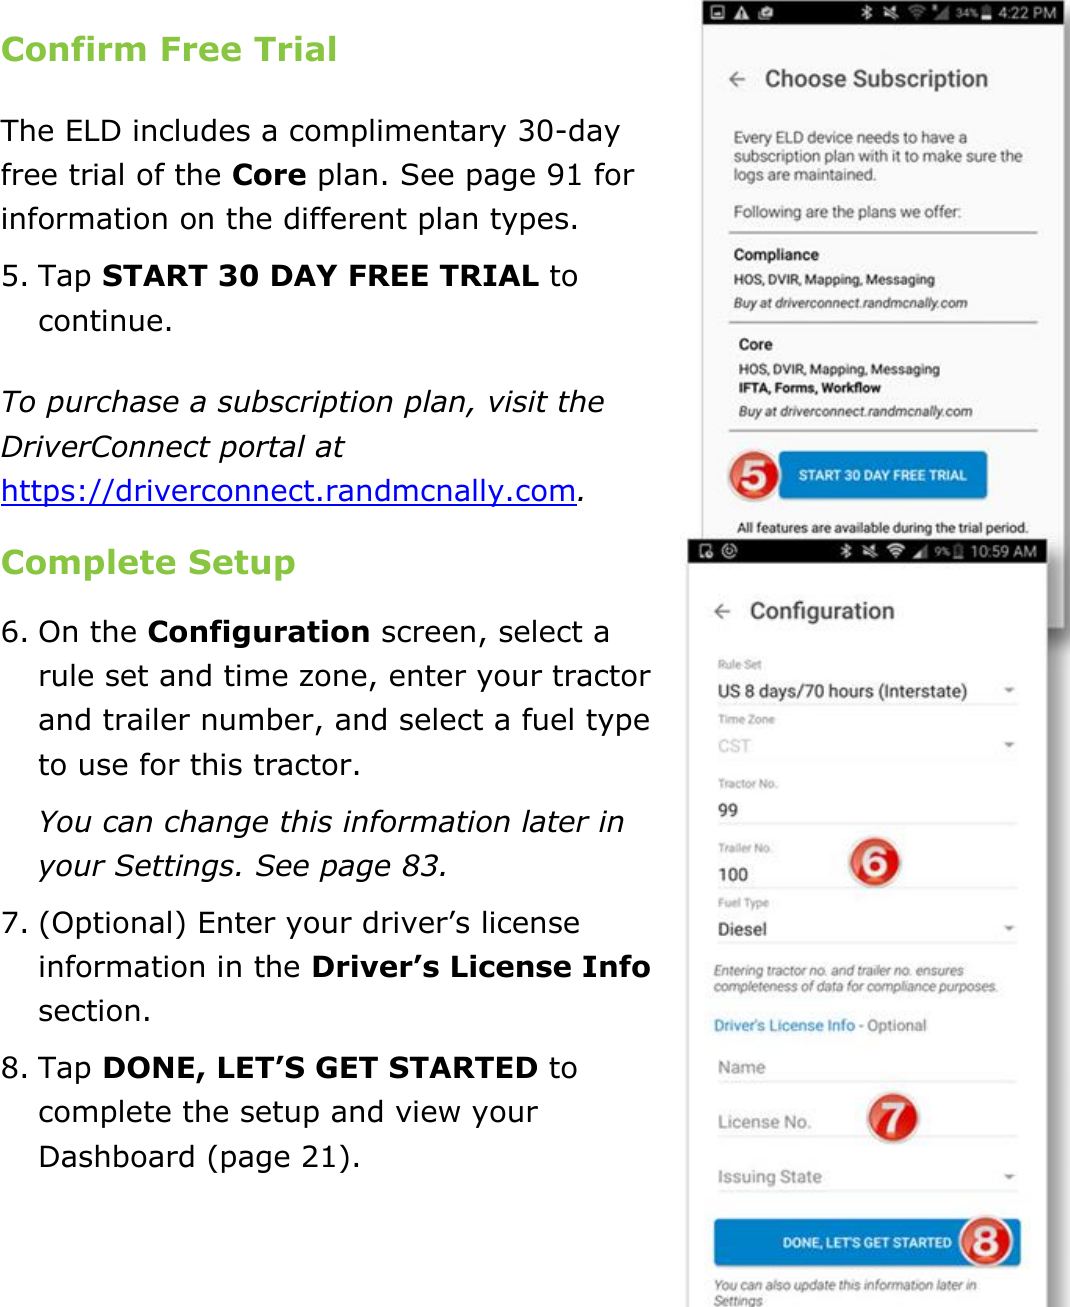 Set My Duty Status DriverConnect User Guide  14 © 2017, Rand McNally, Inc.  Confirm Free Trial The ELD includes a complimentary 30-day free trial of the Core plan. See page 91 for information on the different plan types. 5. Tap START 30 DAY FREE TRIAL to continue. To purchase a subscription plan, visit the DriverConnect portal at https://driverconnect.randmcnally.com. Complete Setup 6. On the Configuration screen, select a rule set and time zone, enter your tractor and trailer number, and select a fuel type to use for this tractor. You can change this information later in your Settings. See page 83. 7. (Optional) Enter your driver’s license information in the Driver’s License Info section. 8. Tap DONE, LET’S GET STARTED to complete the setup and view your Dashboard (page 21).    